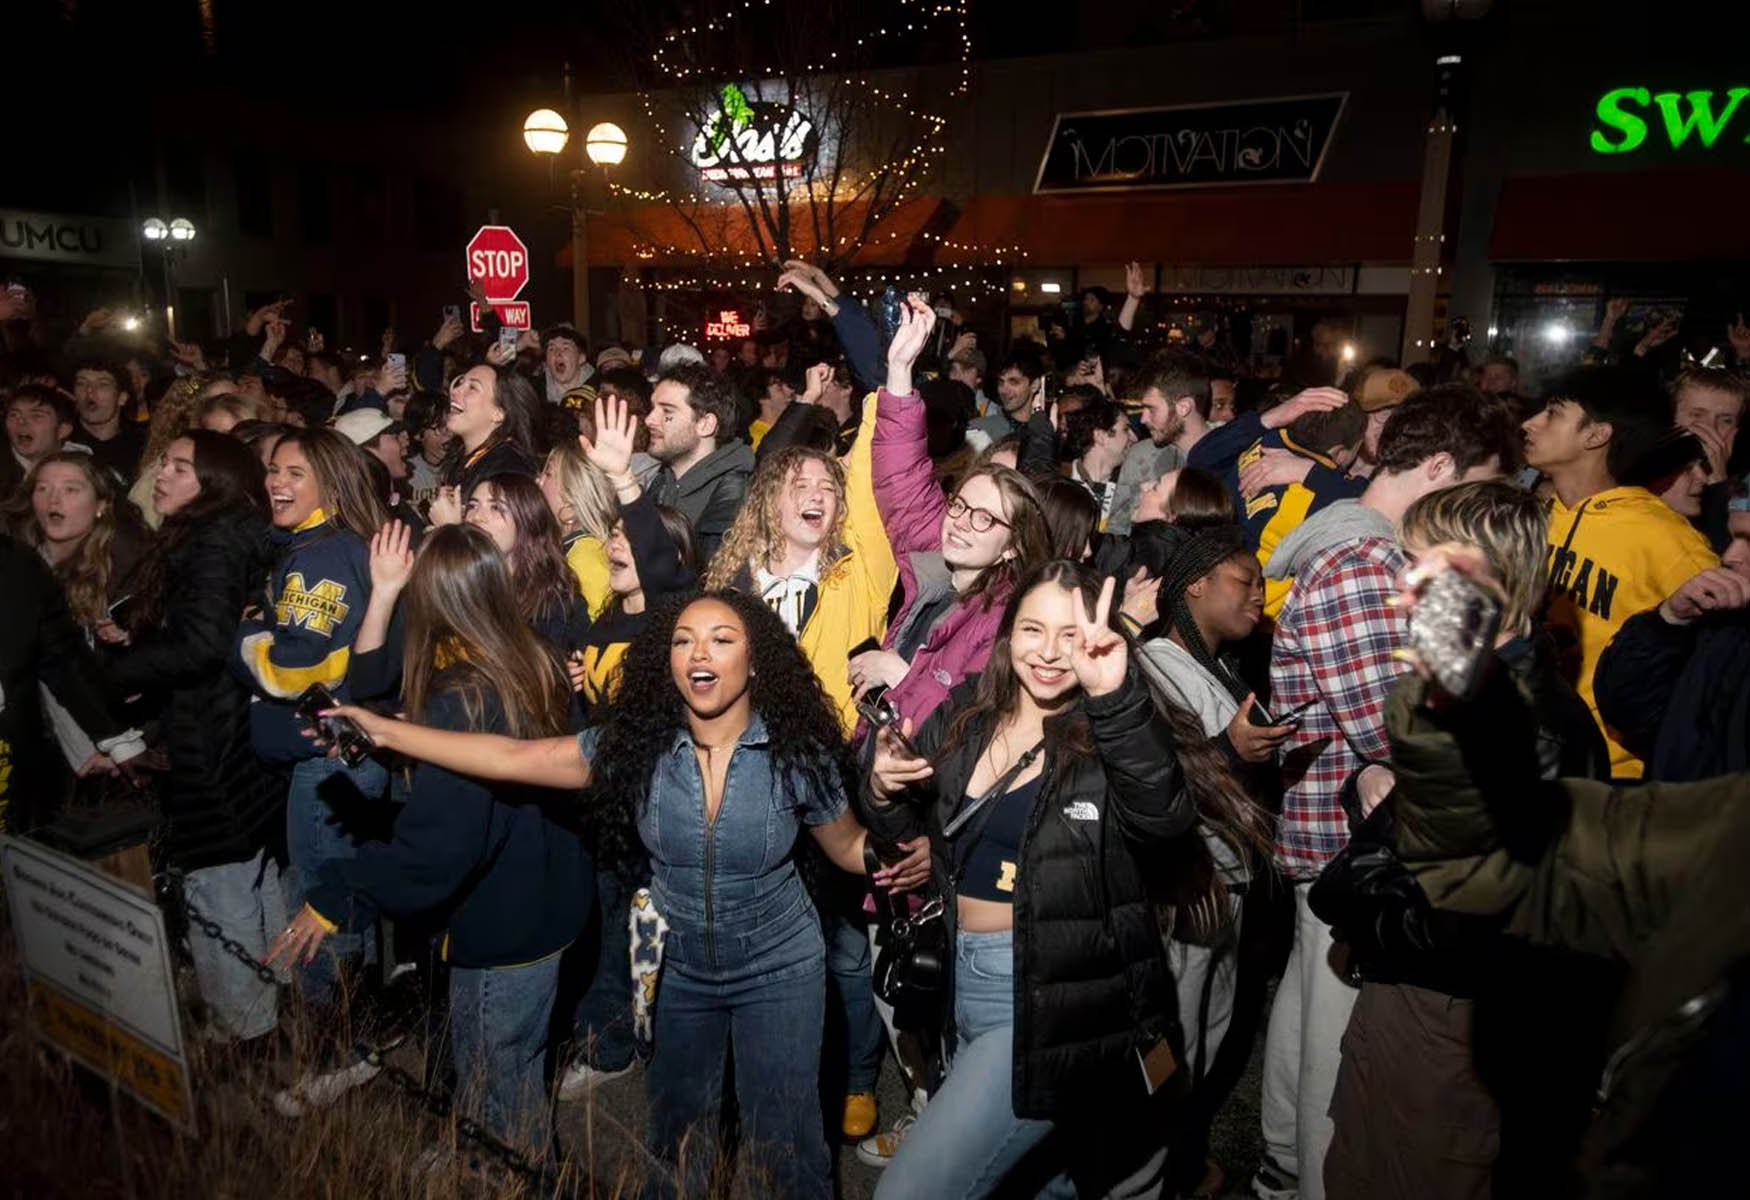 Michigan Fans Celebrate National Championship Victory With Street Party